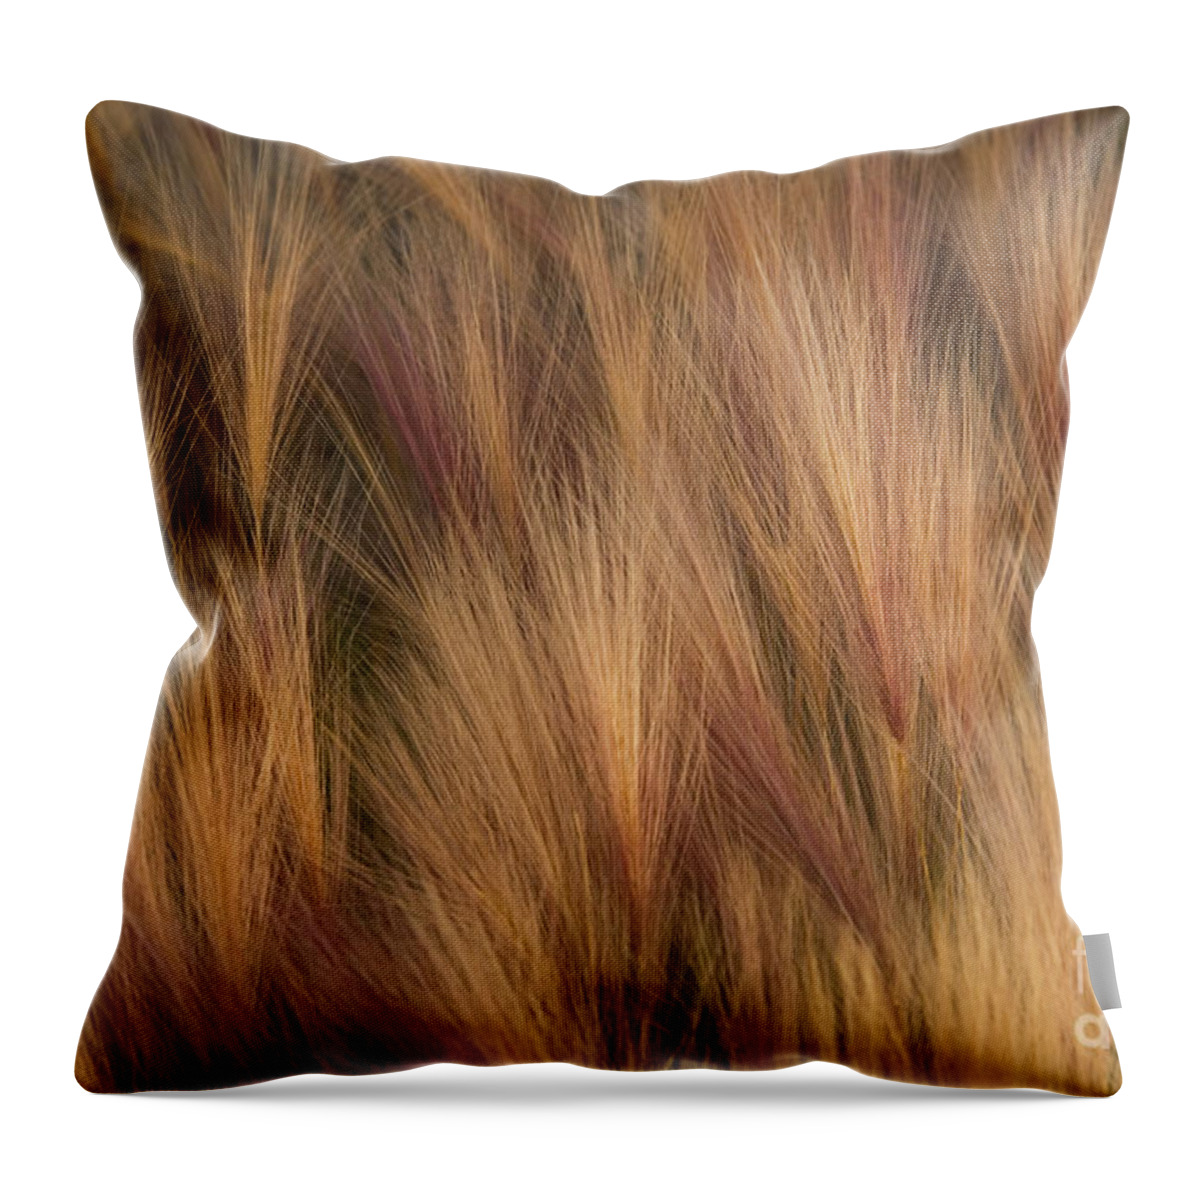 Foxtail Throw Pillow featuring the photograph Foxtail by Ron Sanford